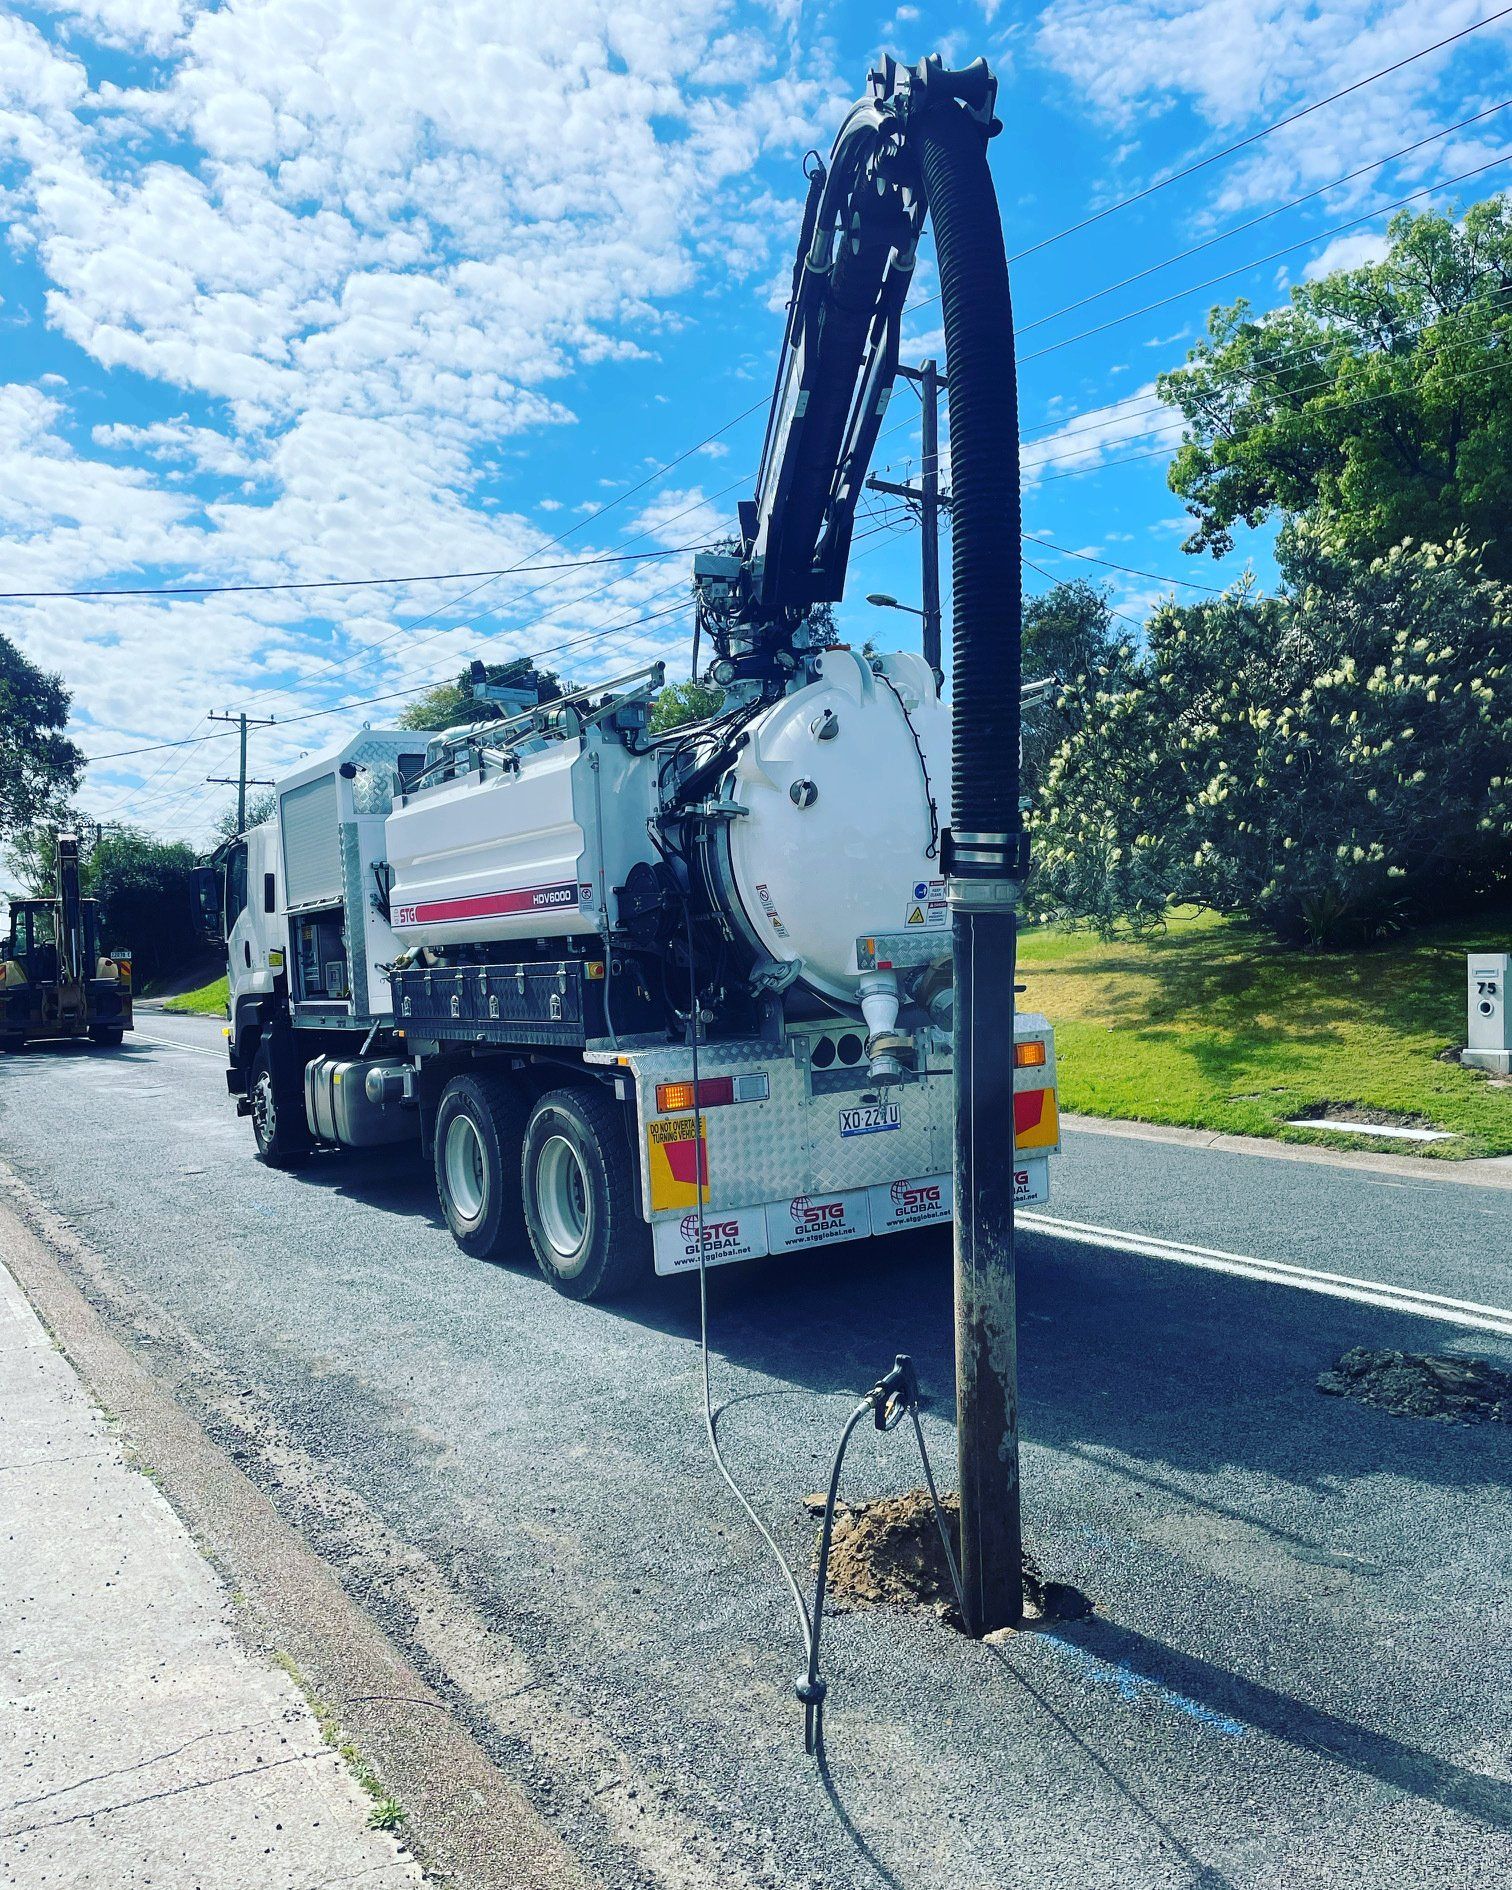 Pothole Vehicle — East Coast Locating Services in Wallalong, NSW